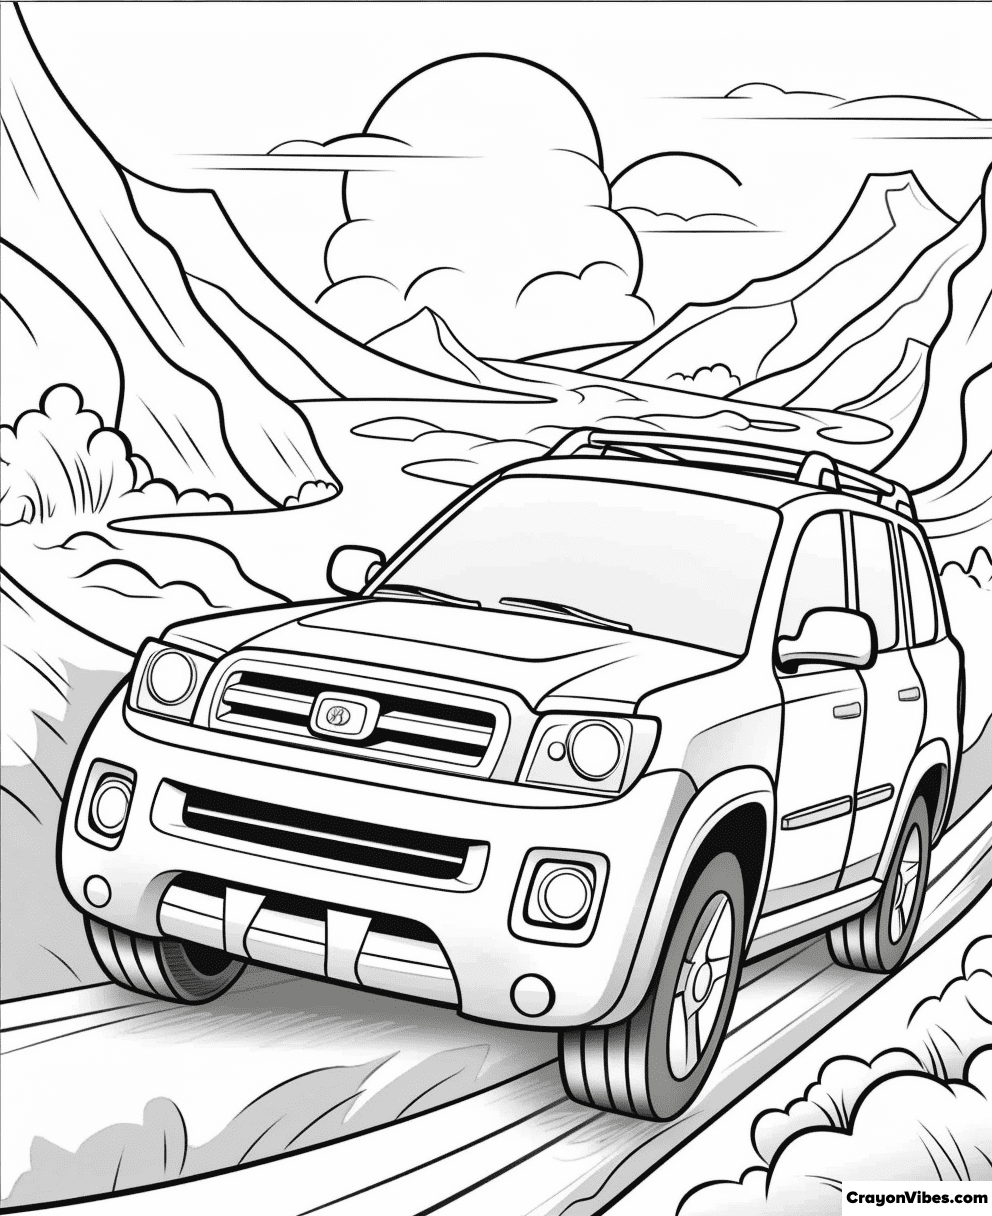 Jeep Coloring Pages Free Printables for Kids & Adults